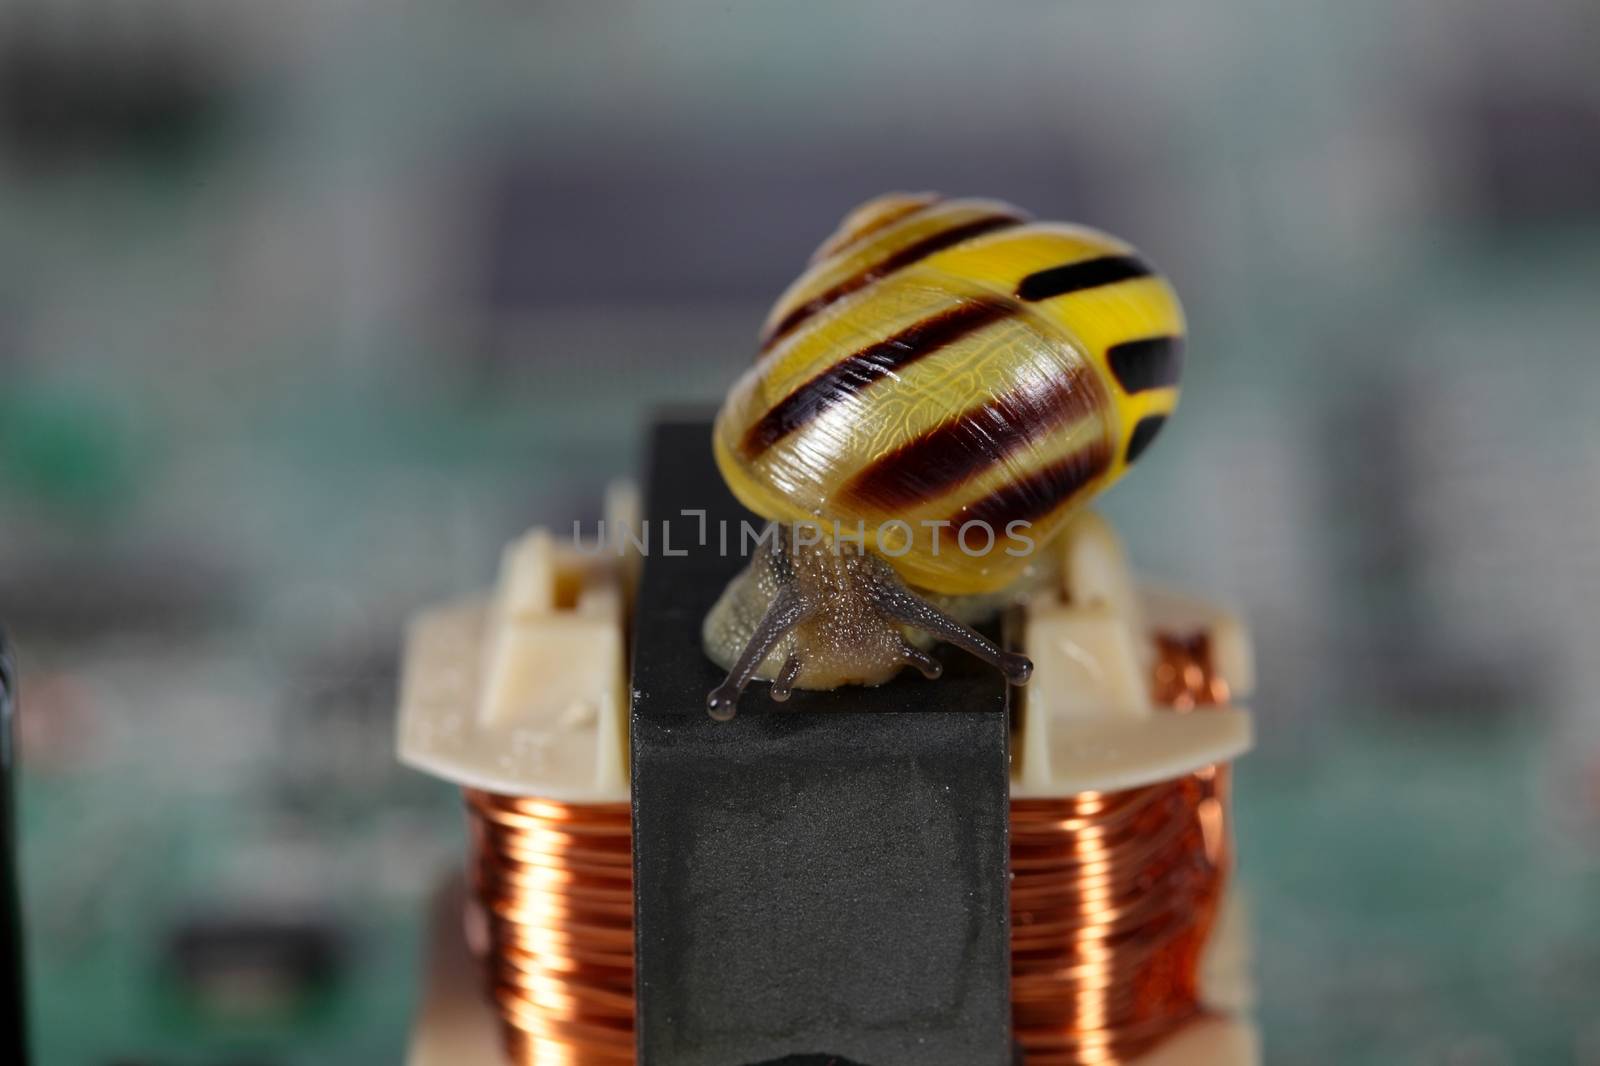 Macro photo of a small snail on a conductor board.